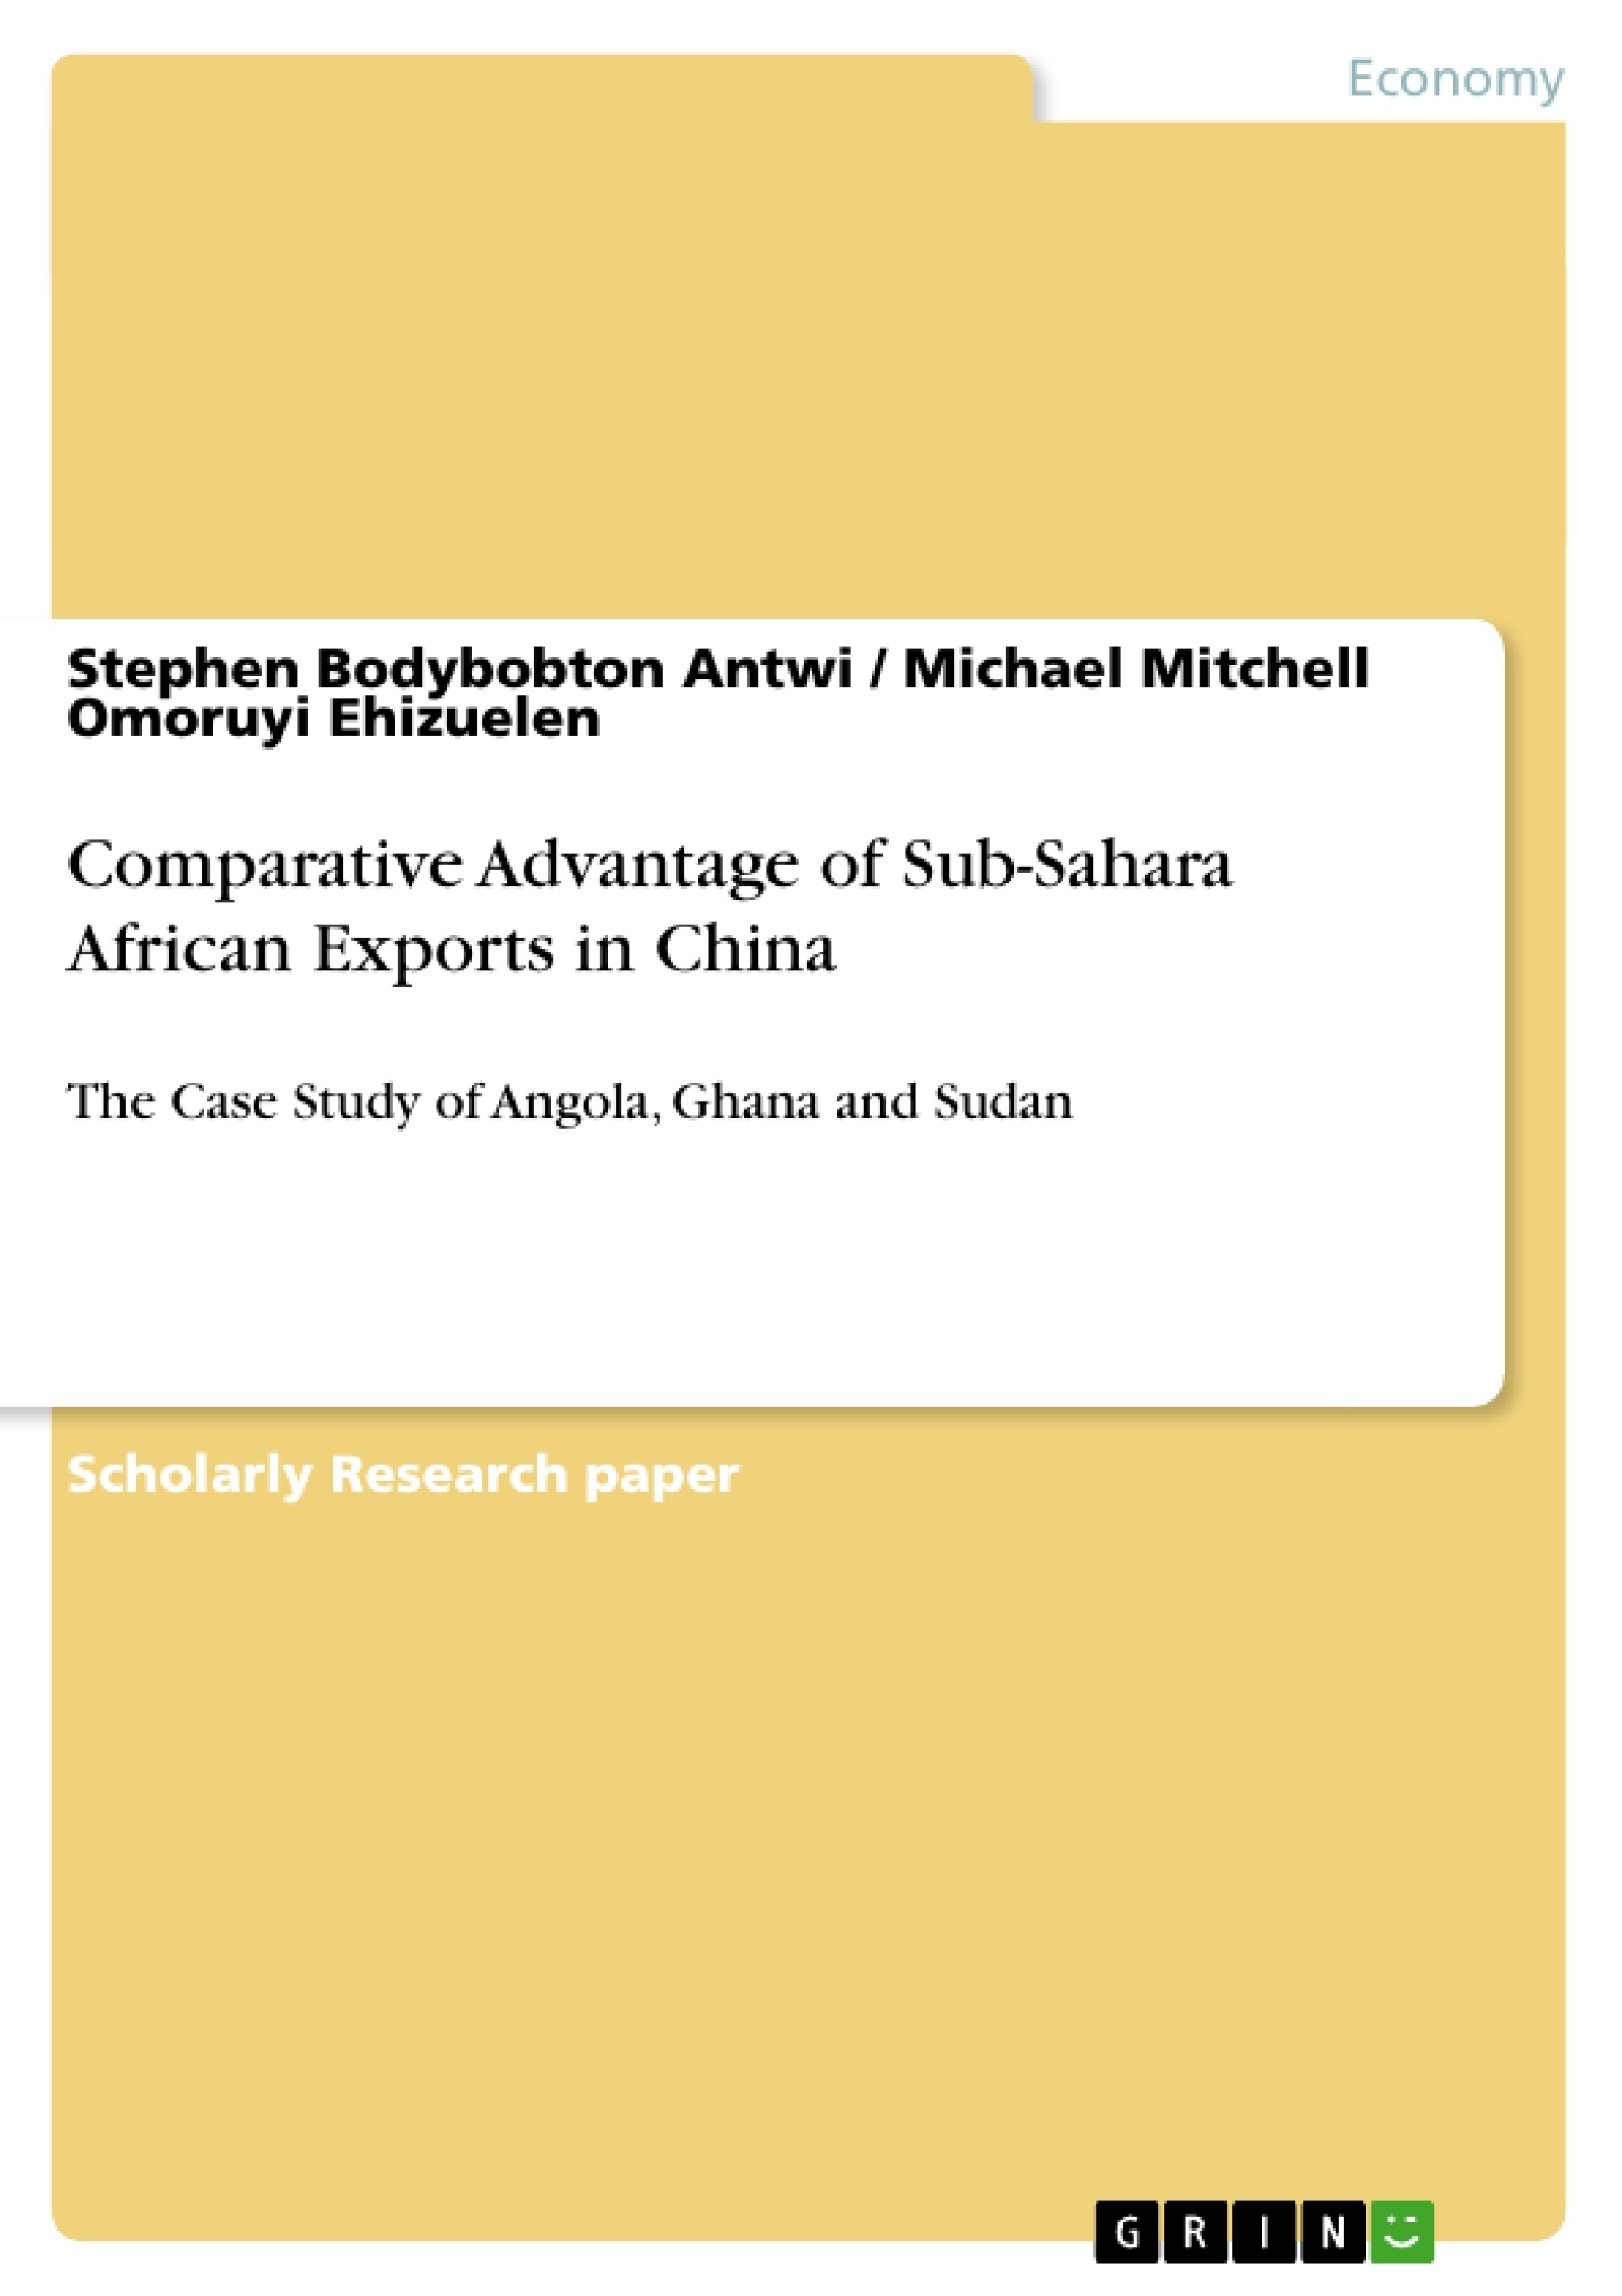 Title: Comparative Advantage of Sub-Sahara African Exports in China